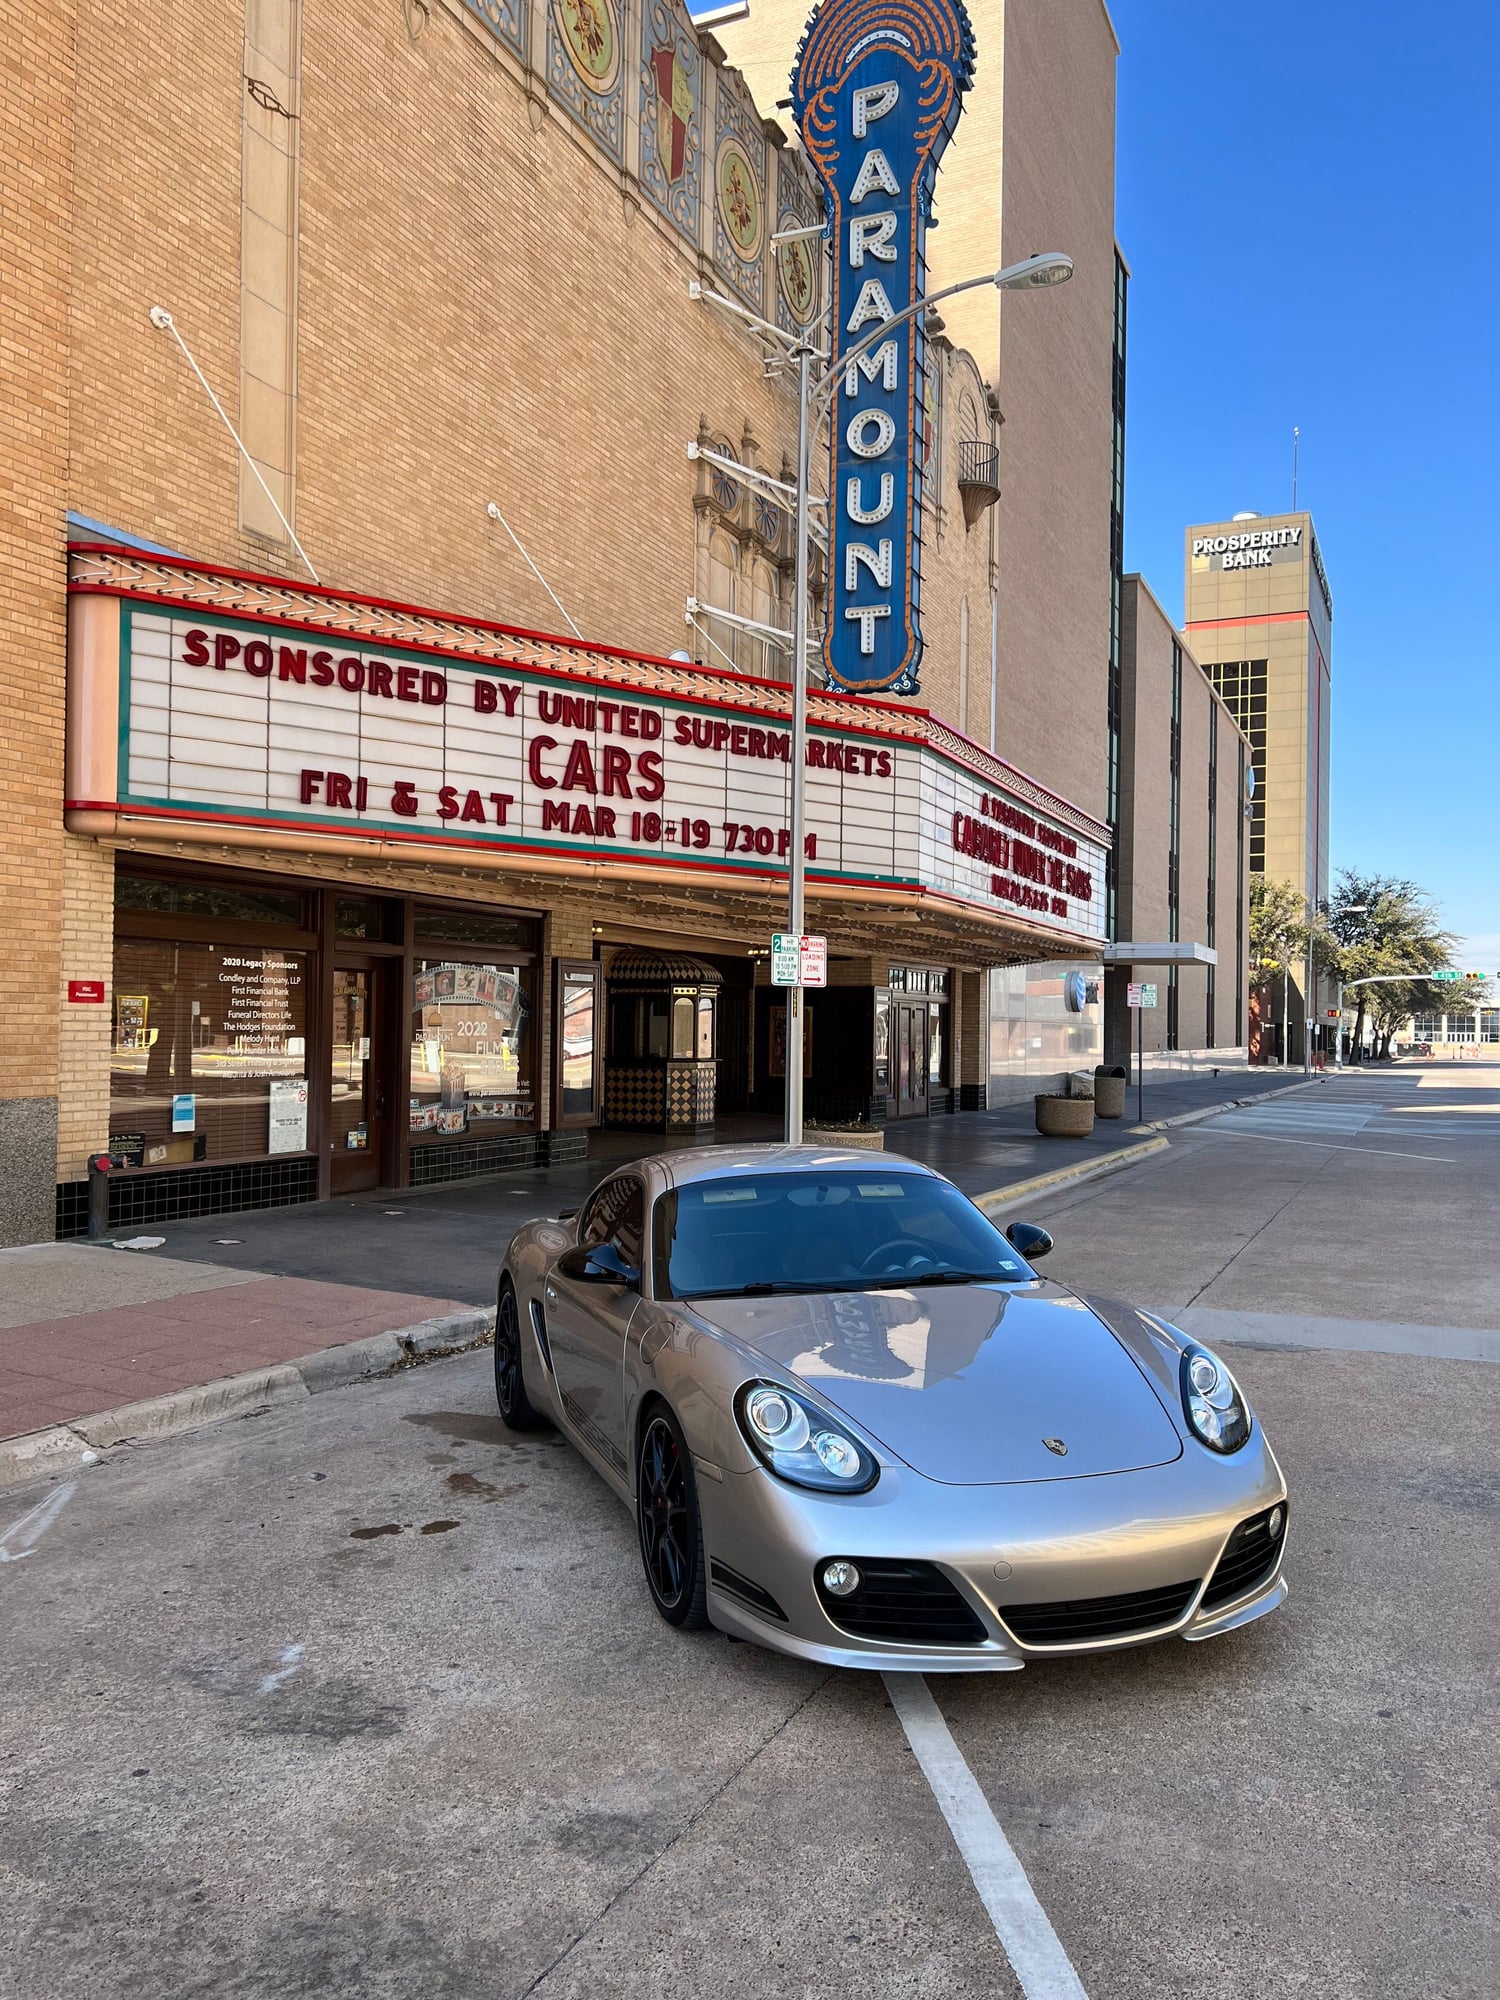 2012 Porsche Cayman - Modified F6I/Raby 2012 Cayman R - Used - VIN WP0AB2A8XCS793377 - 73,000 Miles - 6 cyl - 2WD - Automatic - Coupe - Silver - Houston, TX 77459, United States